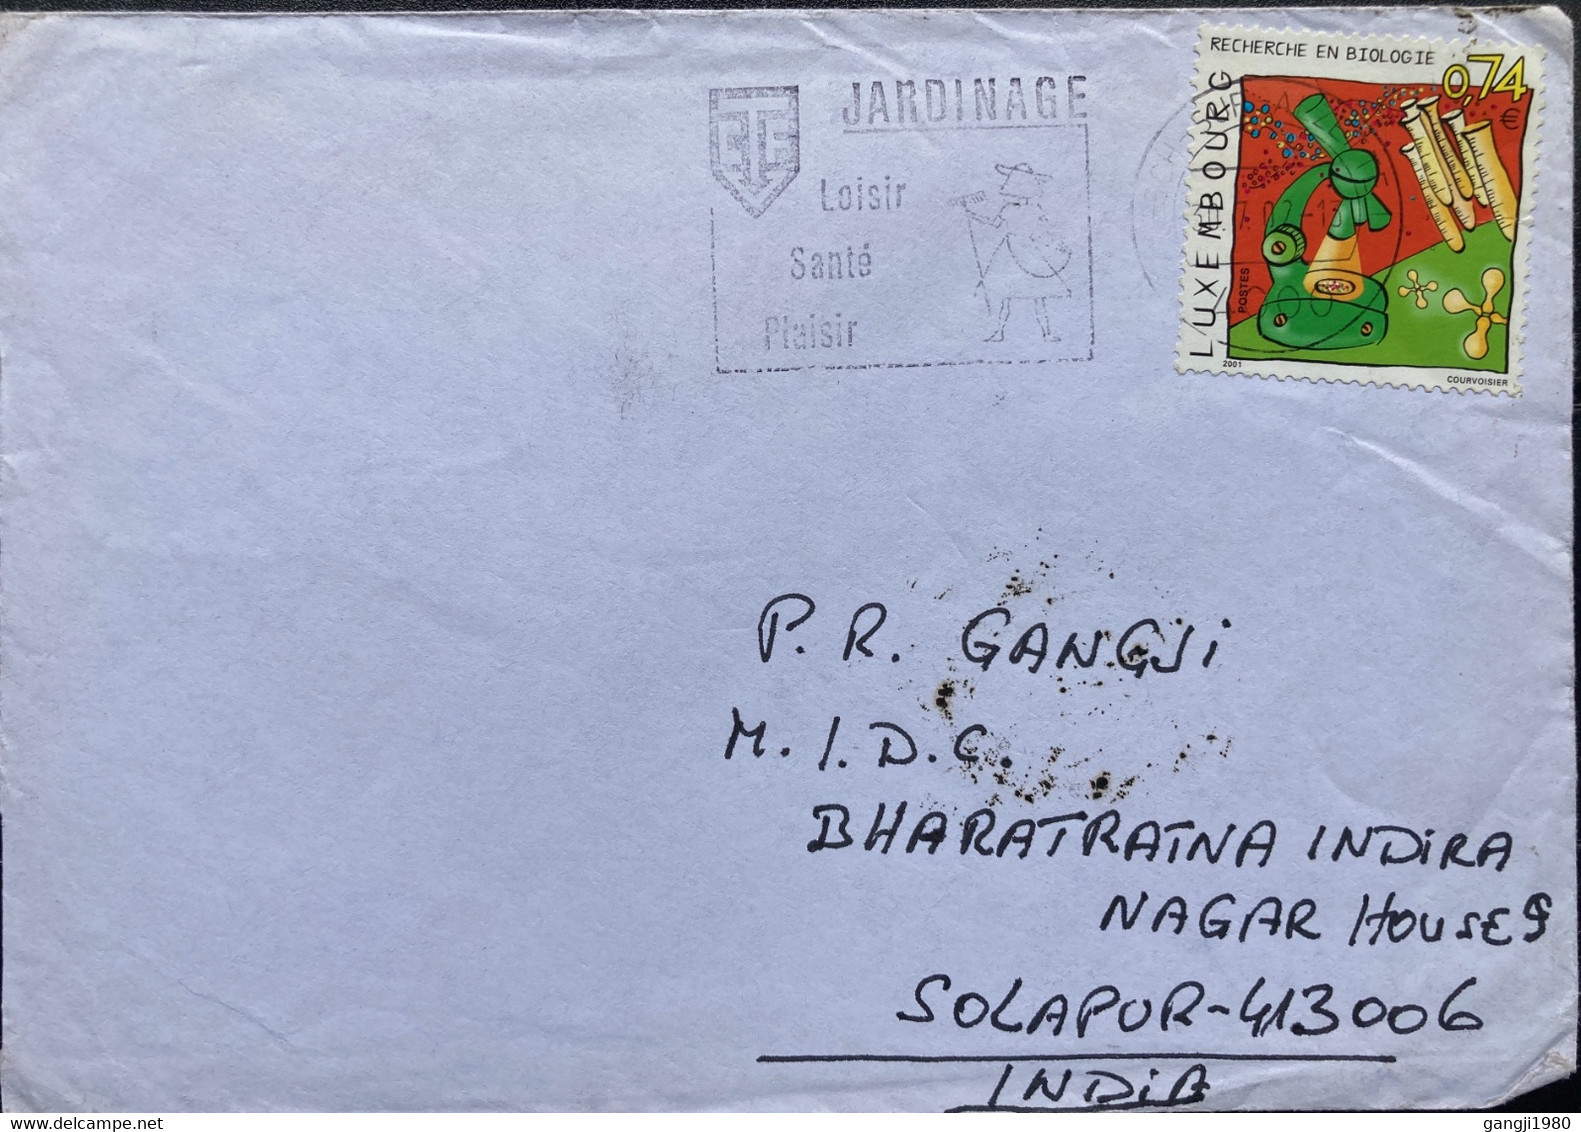 LUXEMBOURG 2002, REASERCH ,MICROSCOPE, LABROTARY ,JARDINAGE LOISIR SANTE PLAISIR ,GARDENING FOR HEALTH, COVER TO INDIA - Briefe U. Dokumente